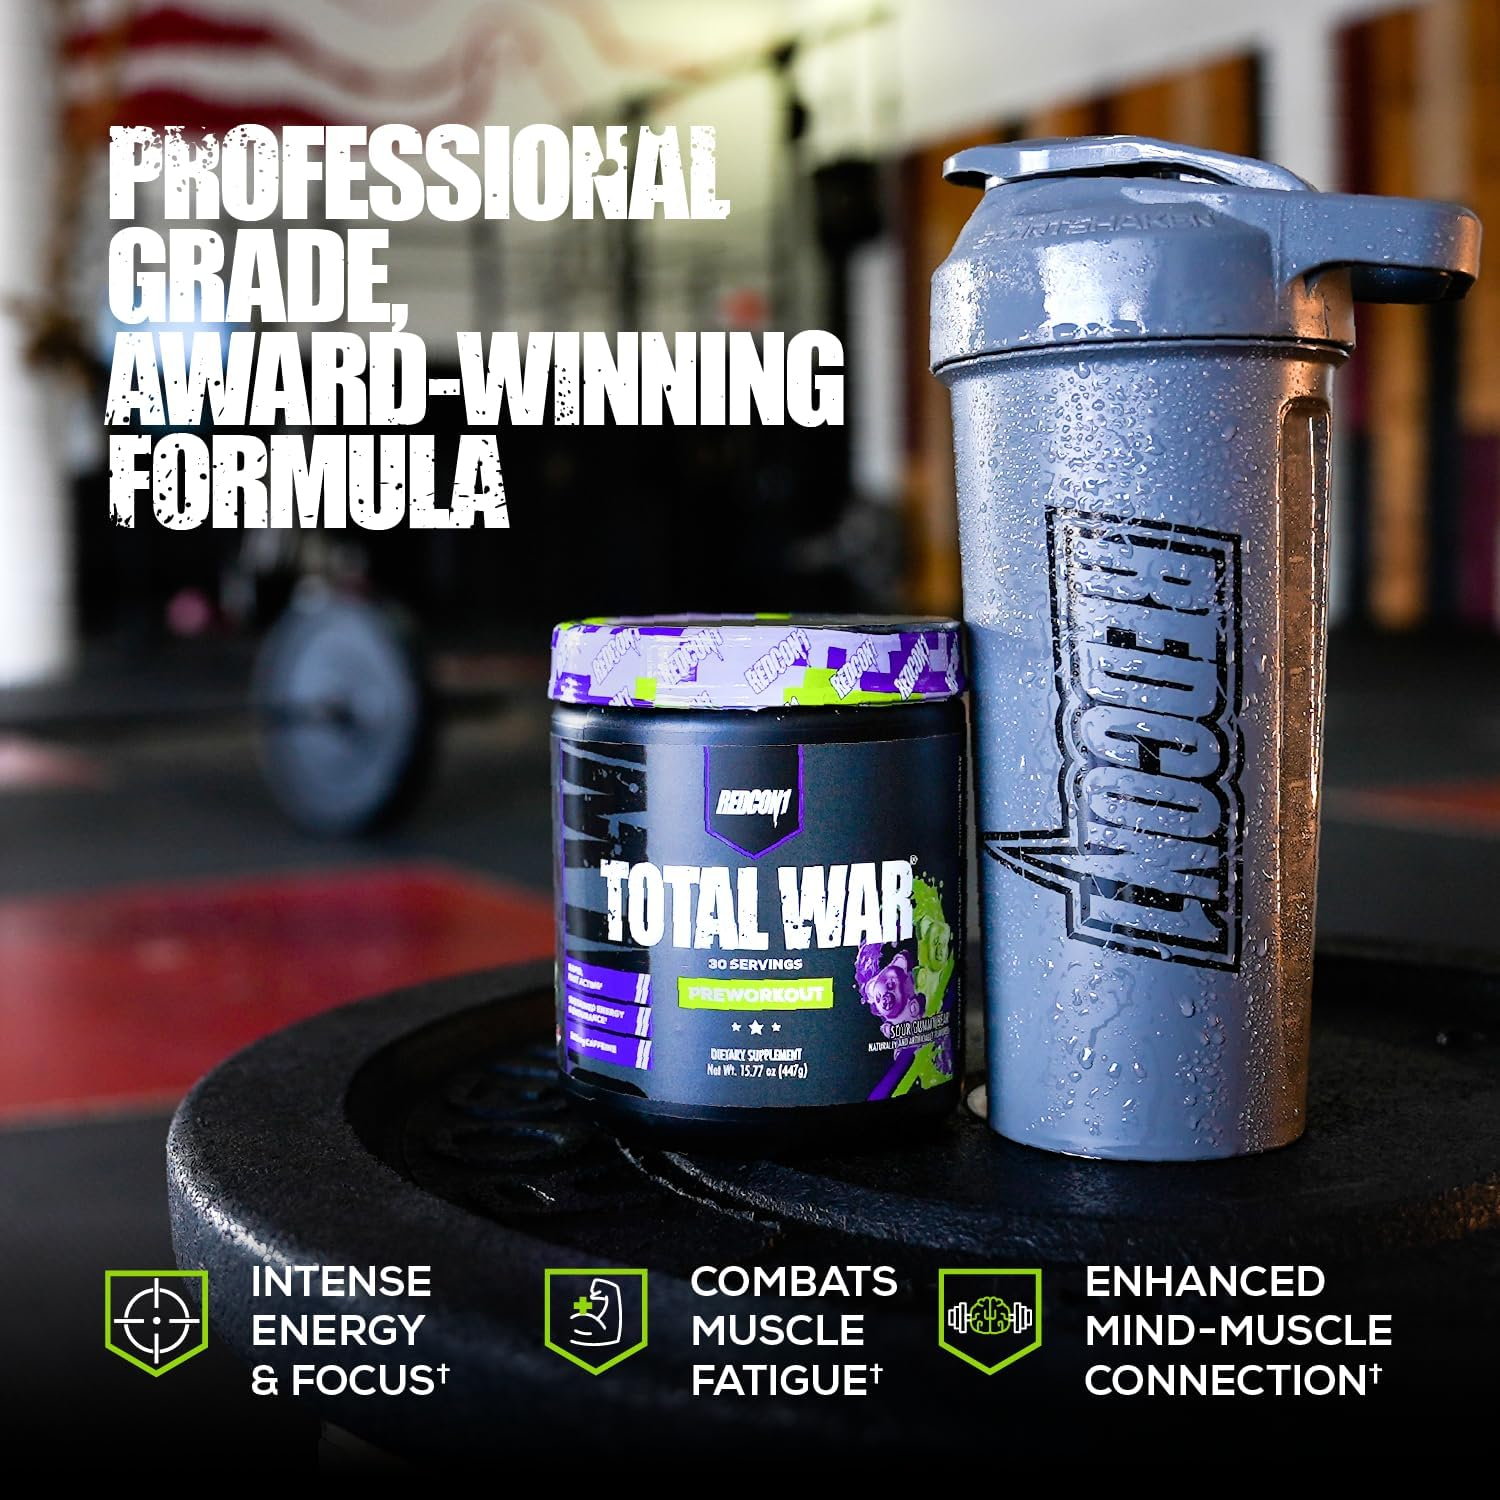 REDCON1 Total War Preworkout - Contains 320mg of Caffeine from Green Tea, Juniper  Beta Alanine - Pre Work Out with Amino Acids to Increase Pump, Energy + Endurance (Sour Gummy Bear, 30 Servings)